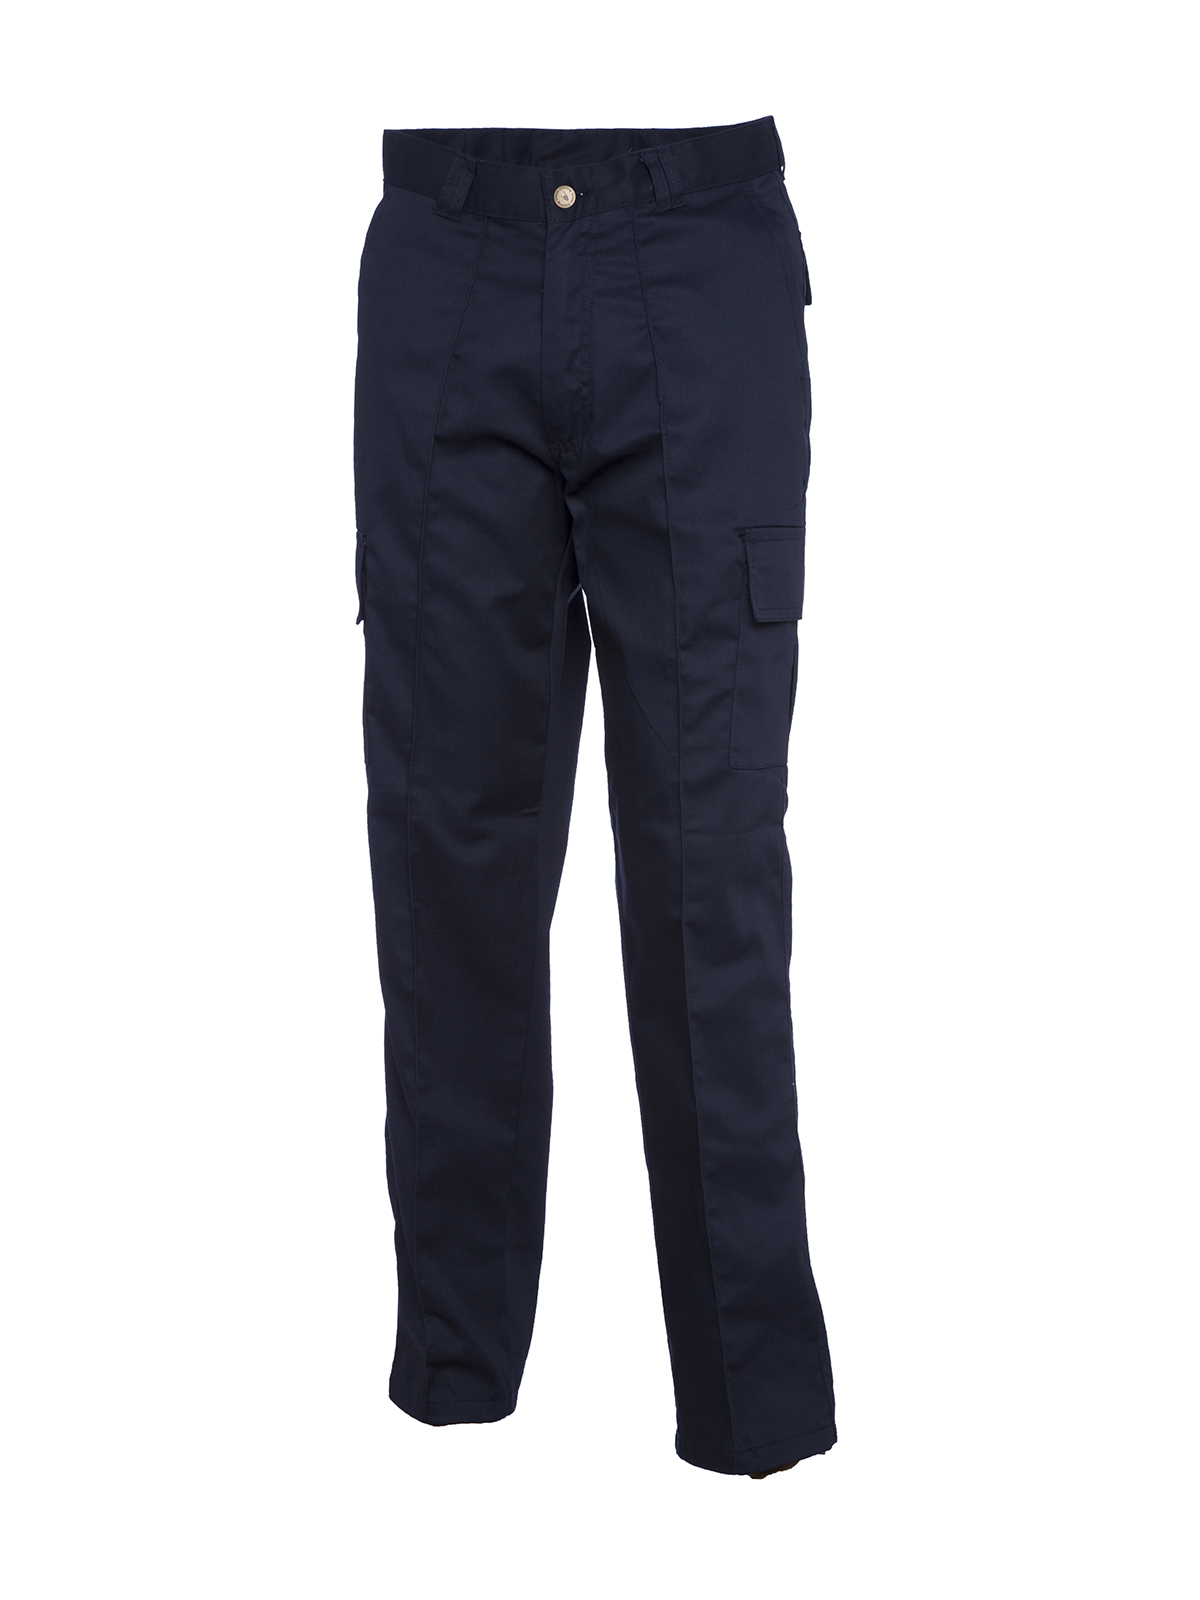 Cargo Trousers, Navy Blue - 44R